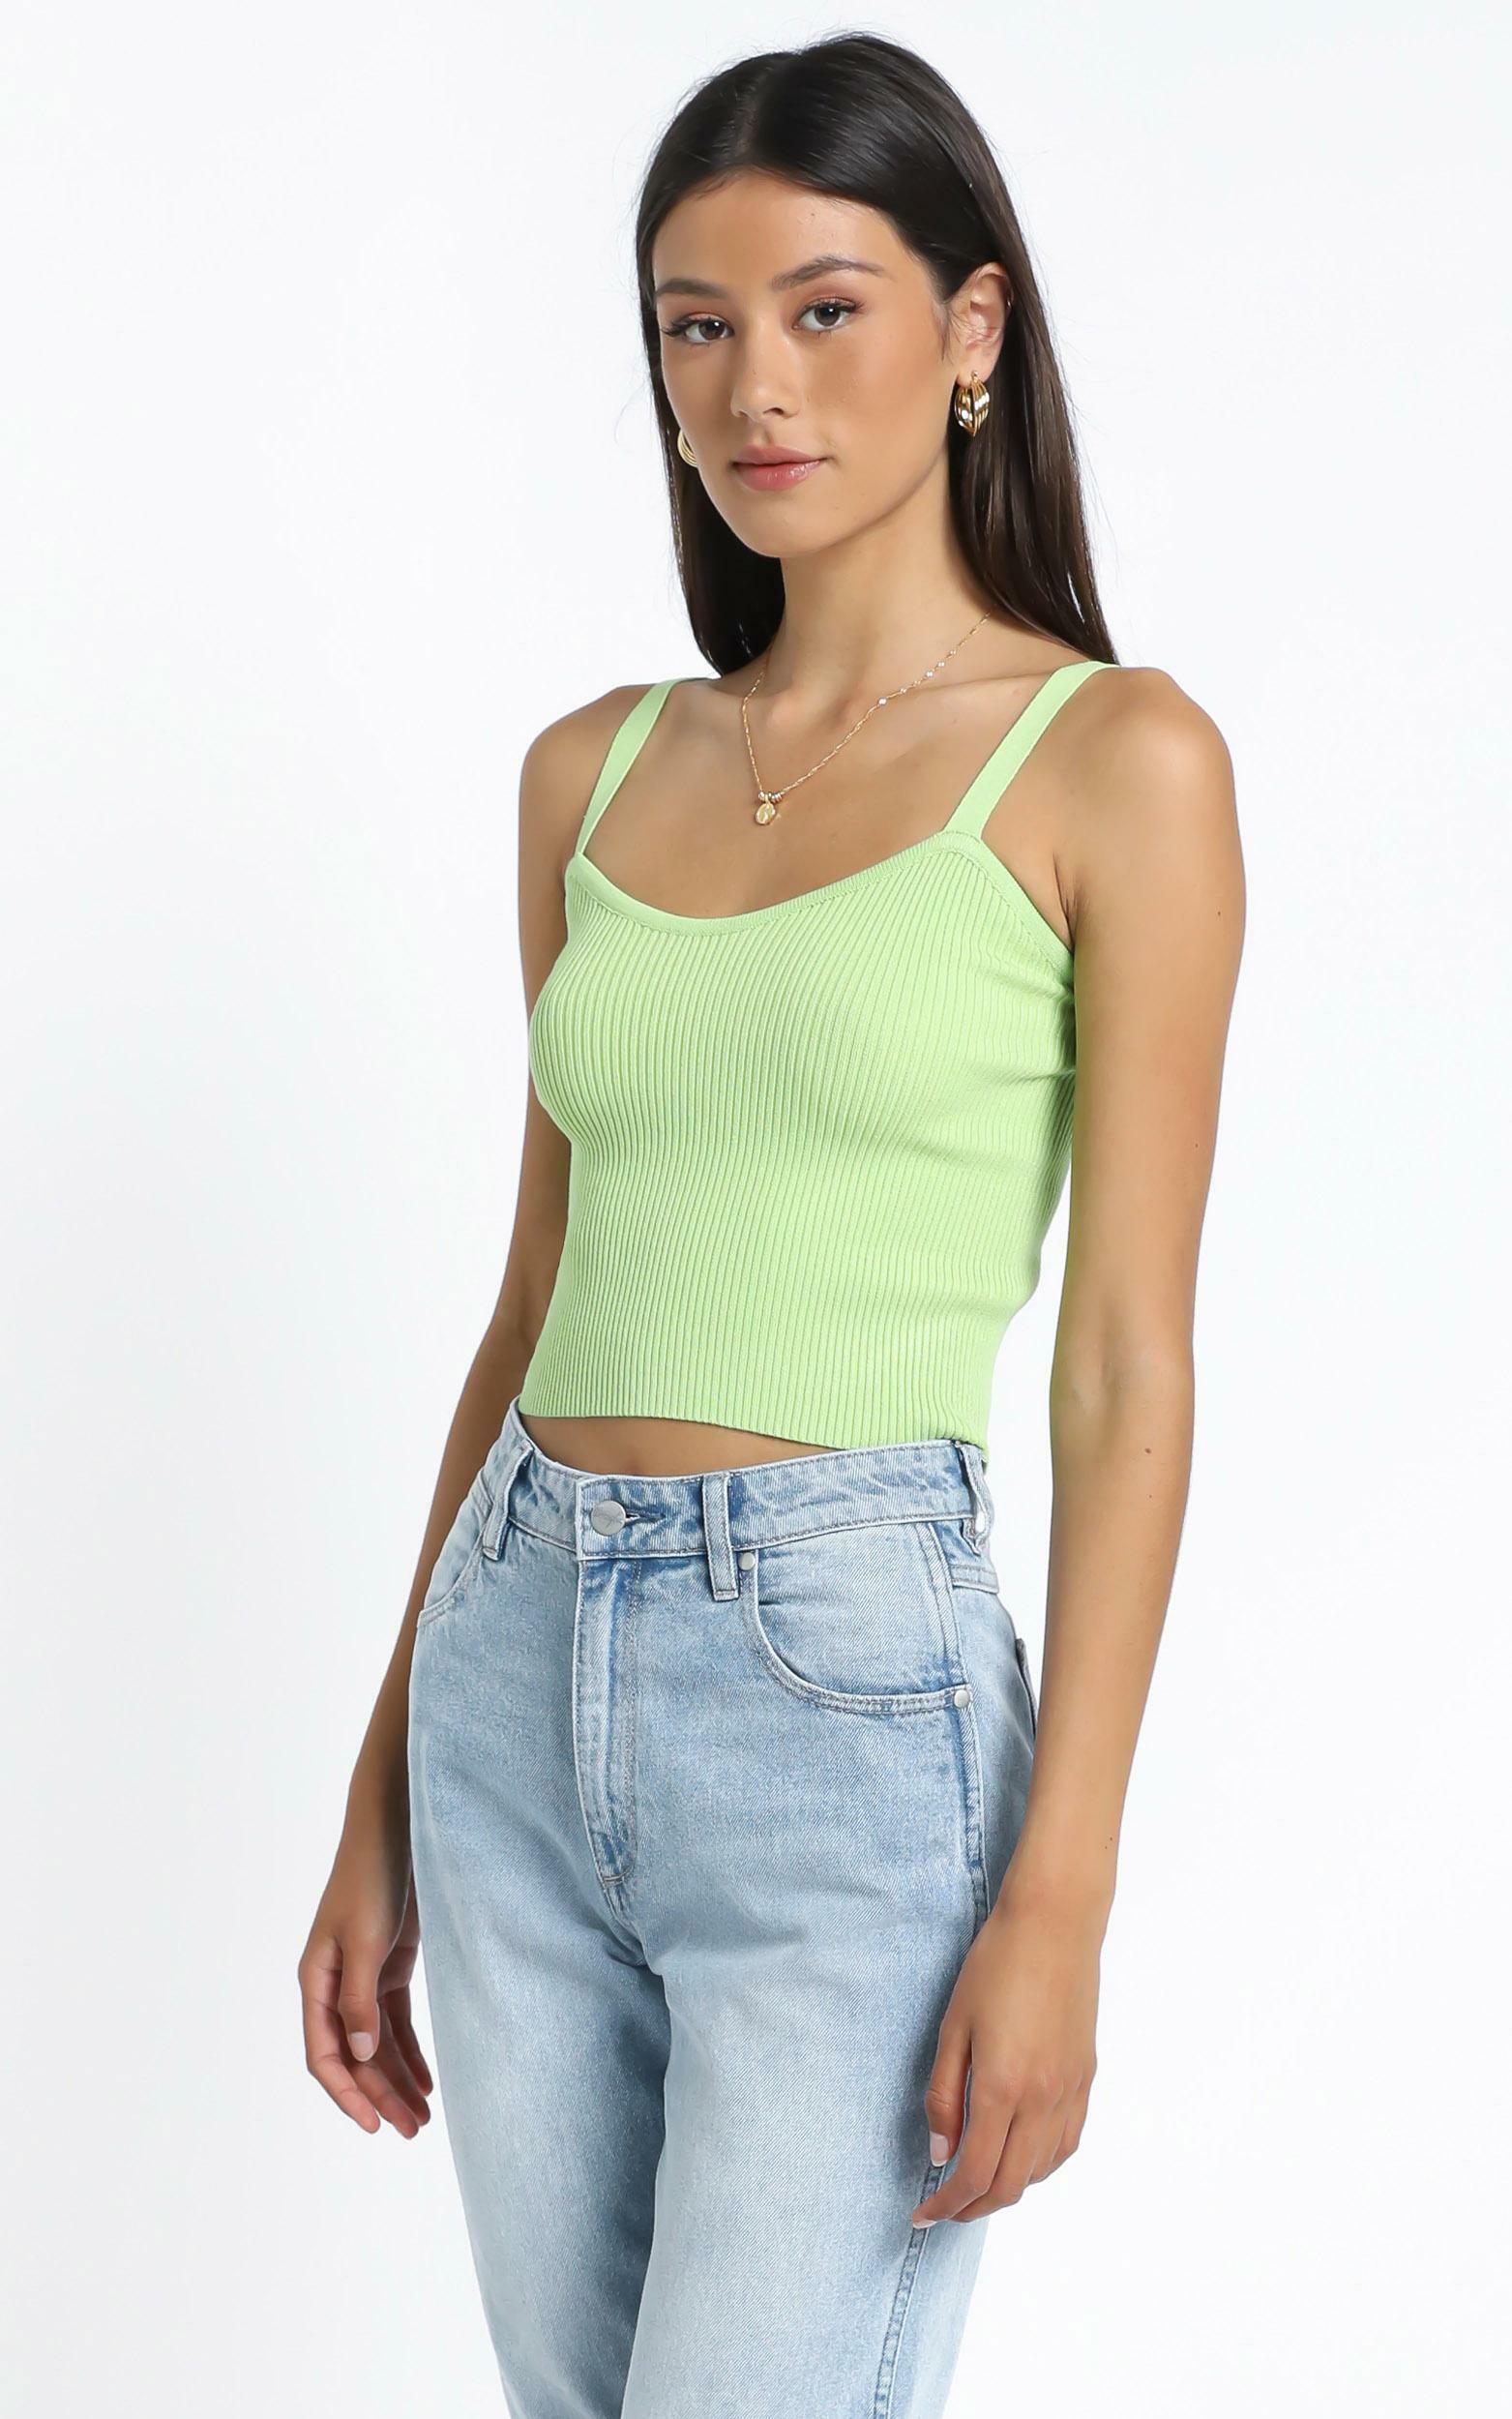 Ayla Knit Top in Lime - M/L, Green, hi-res image number null